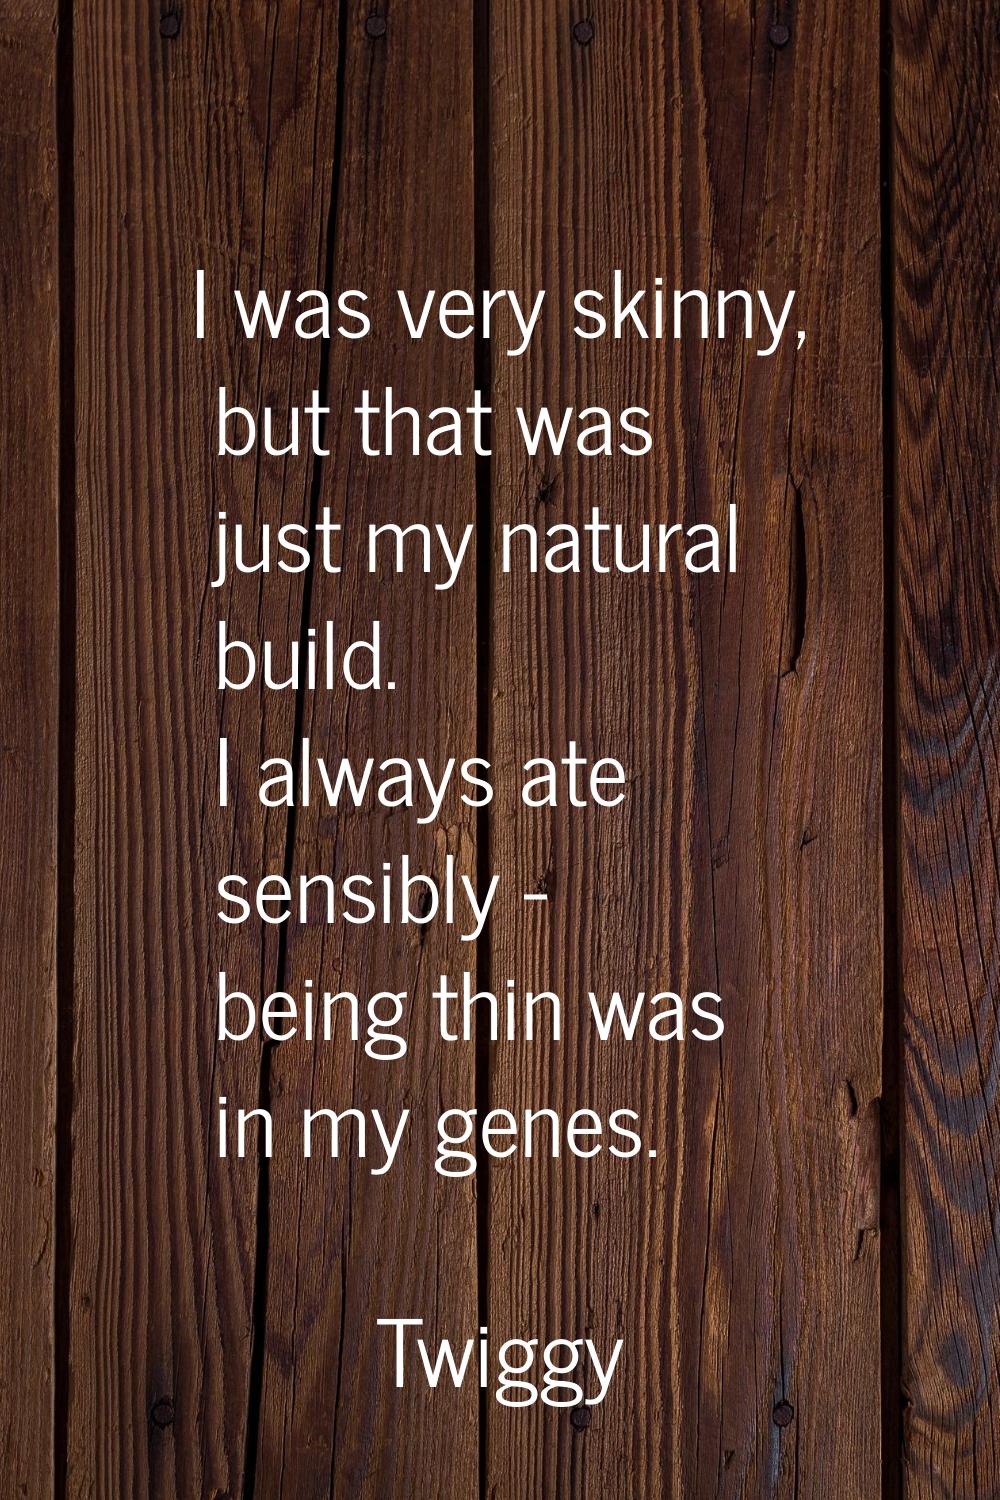 I was very skinny, but that was just my natural build. I always ate sensibly - being thin was in my